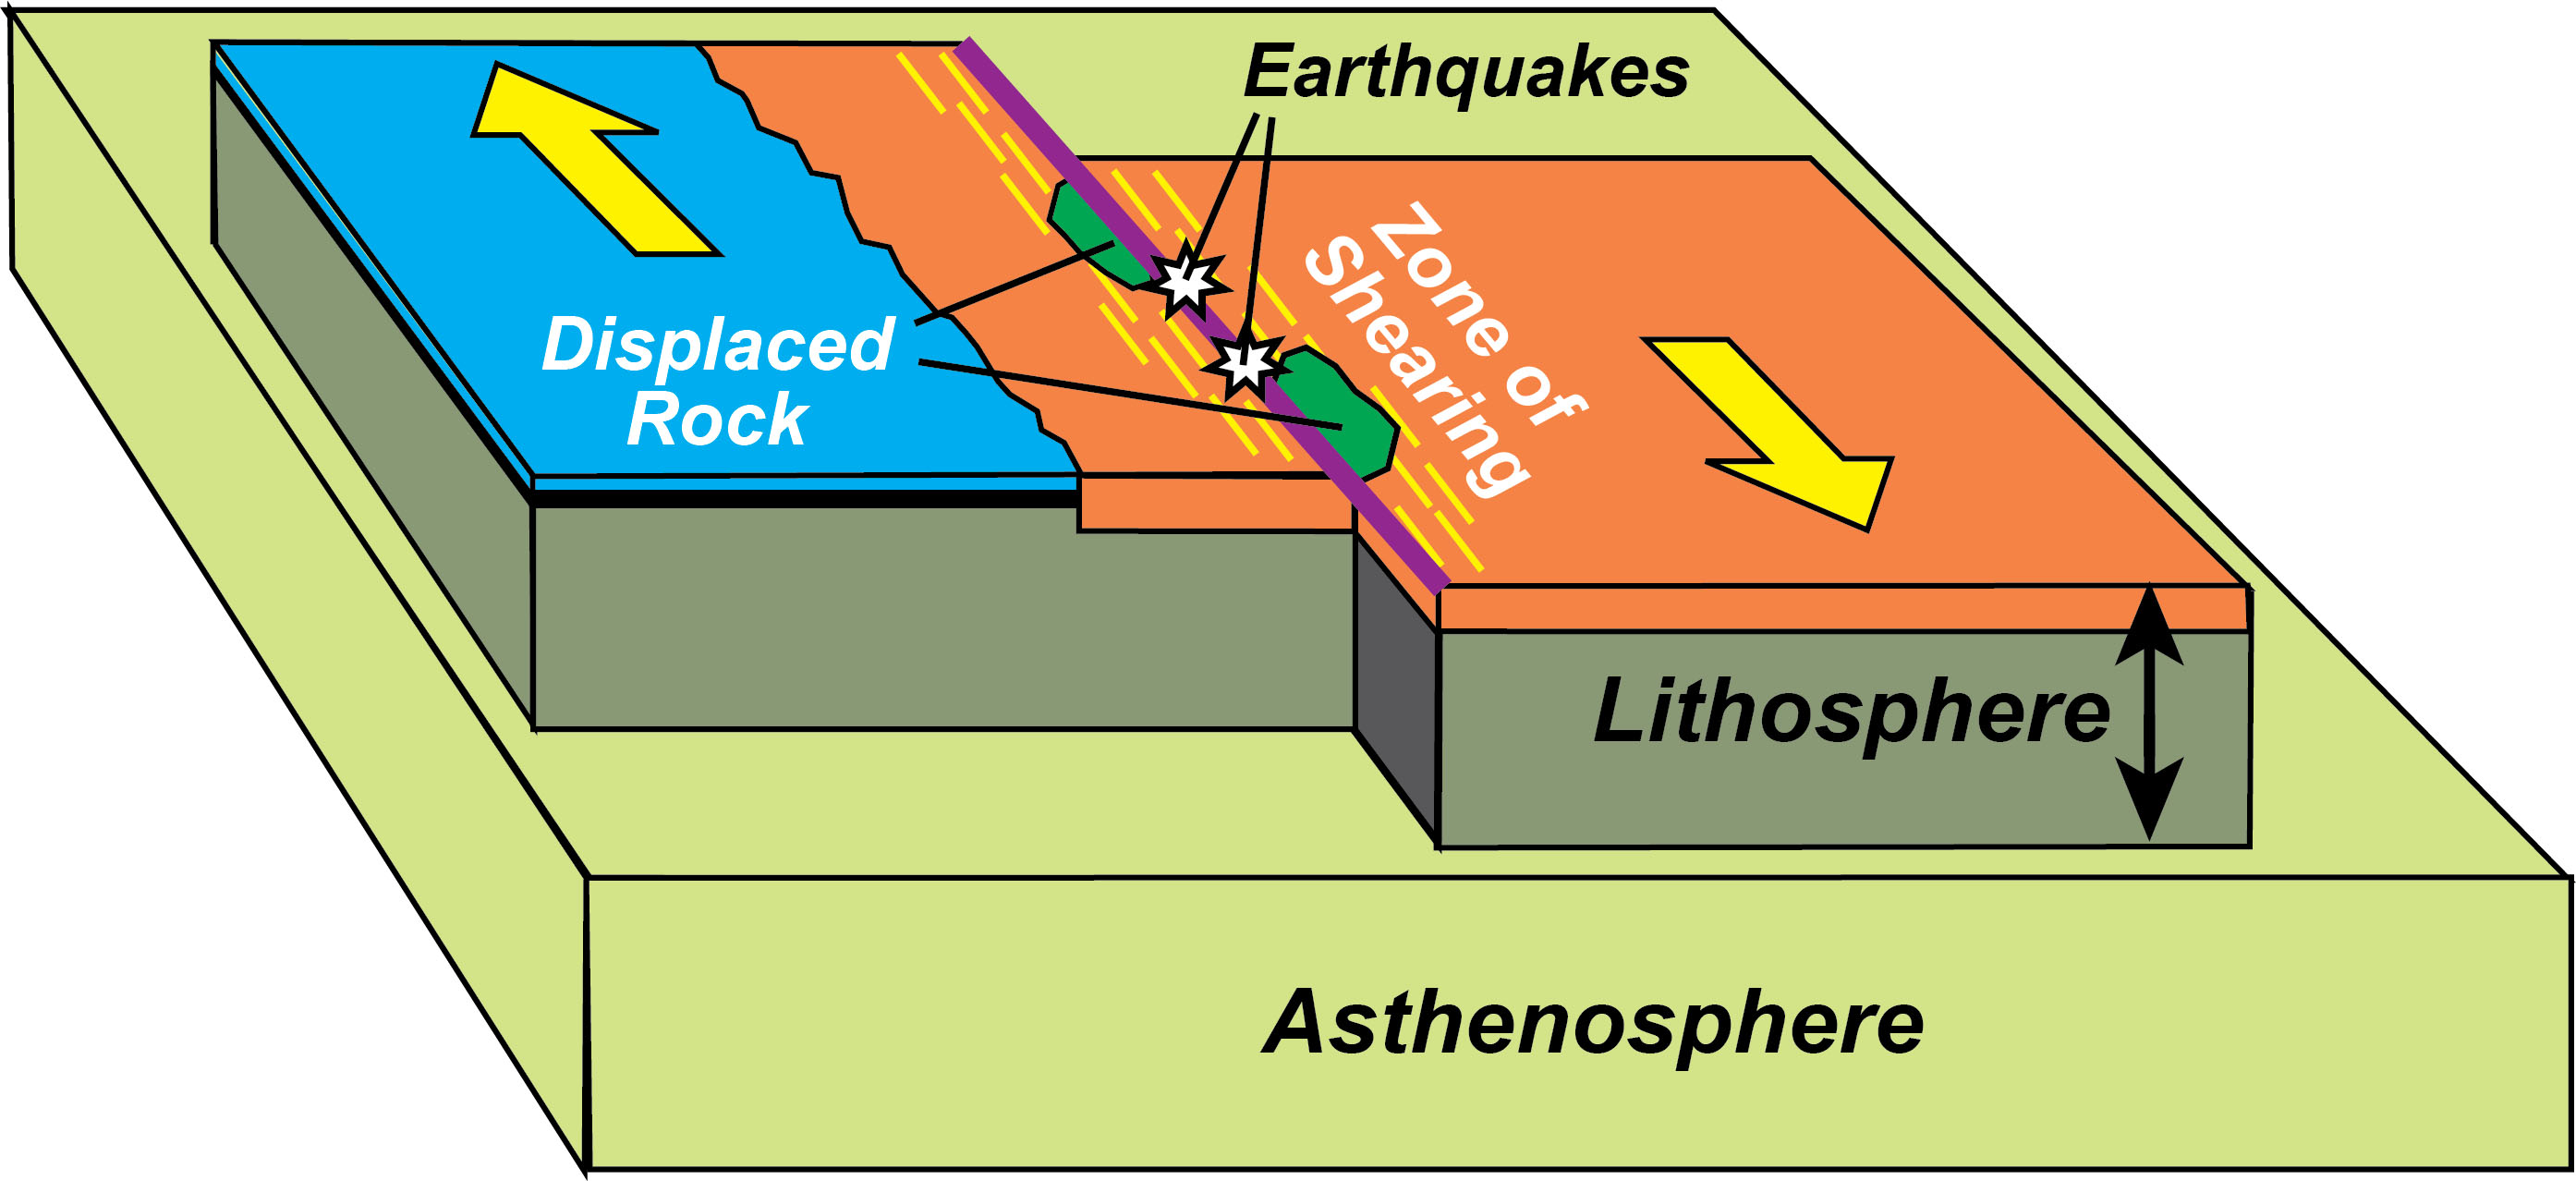 earthquakes-can-only-occur-at-transform-boundaries-the-earth-images